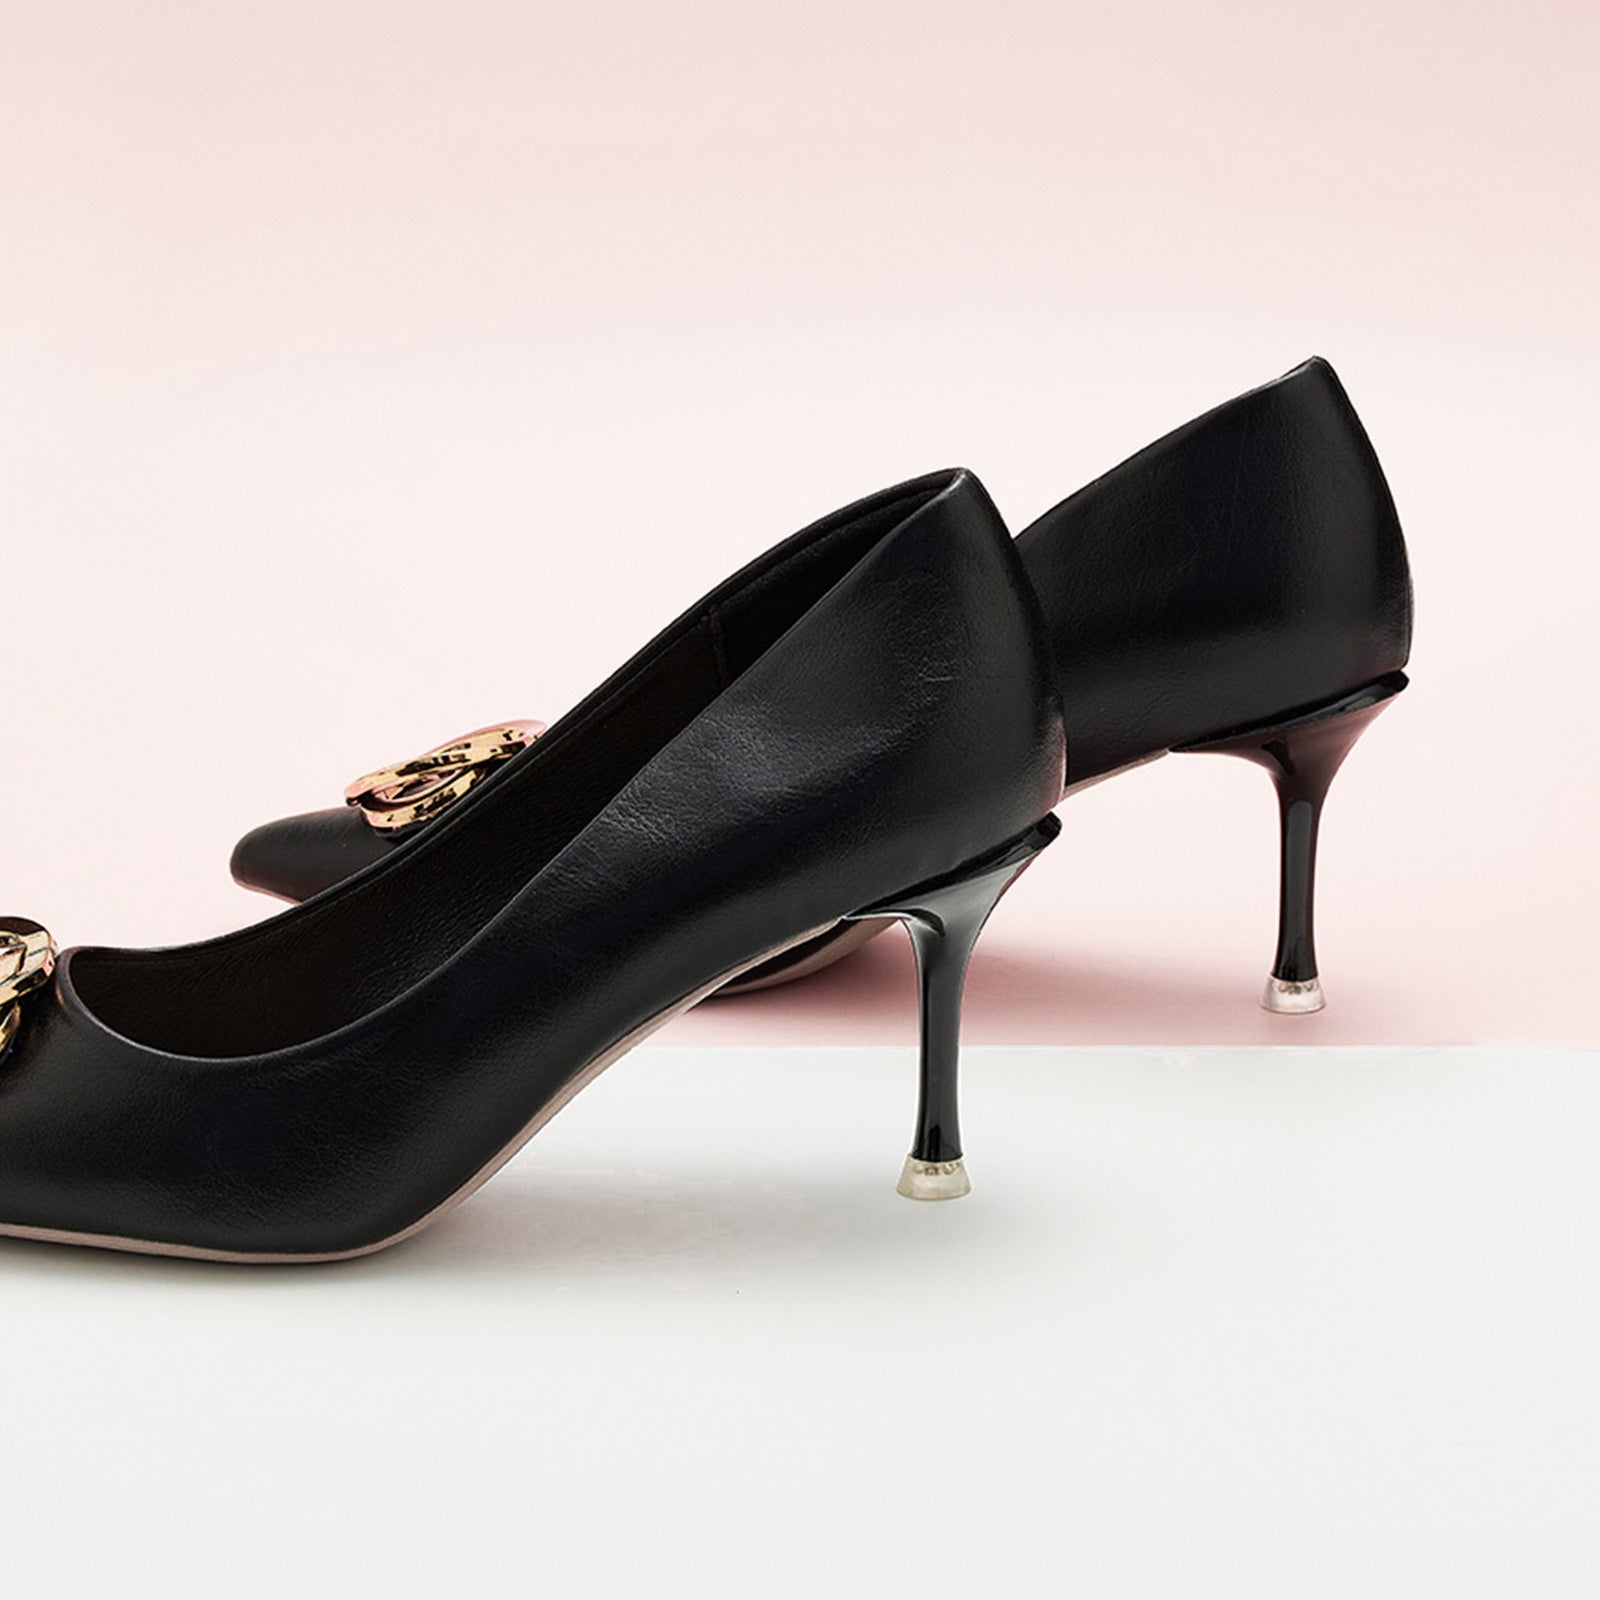 Sleek and Versatile: Metal Buckled Pumps in Black, a timeless and versatile option for everyday elegance